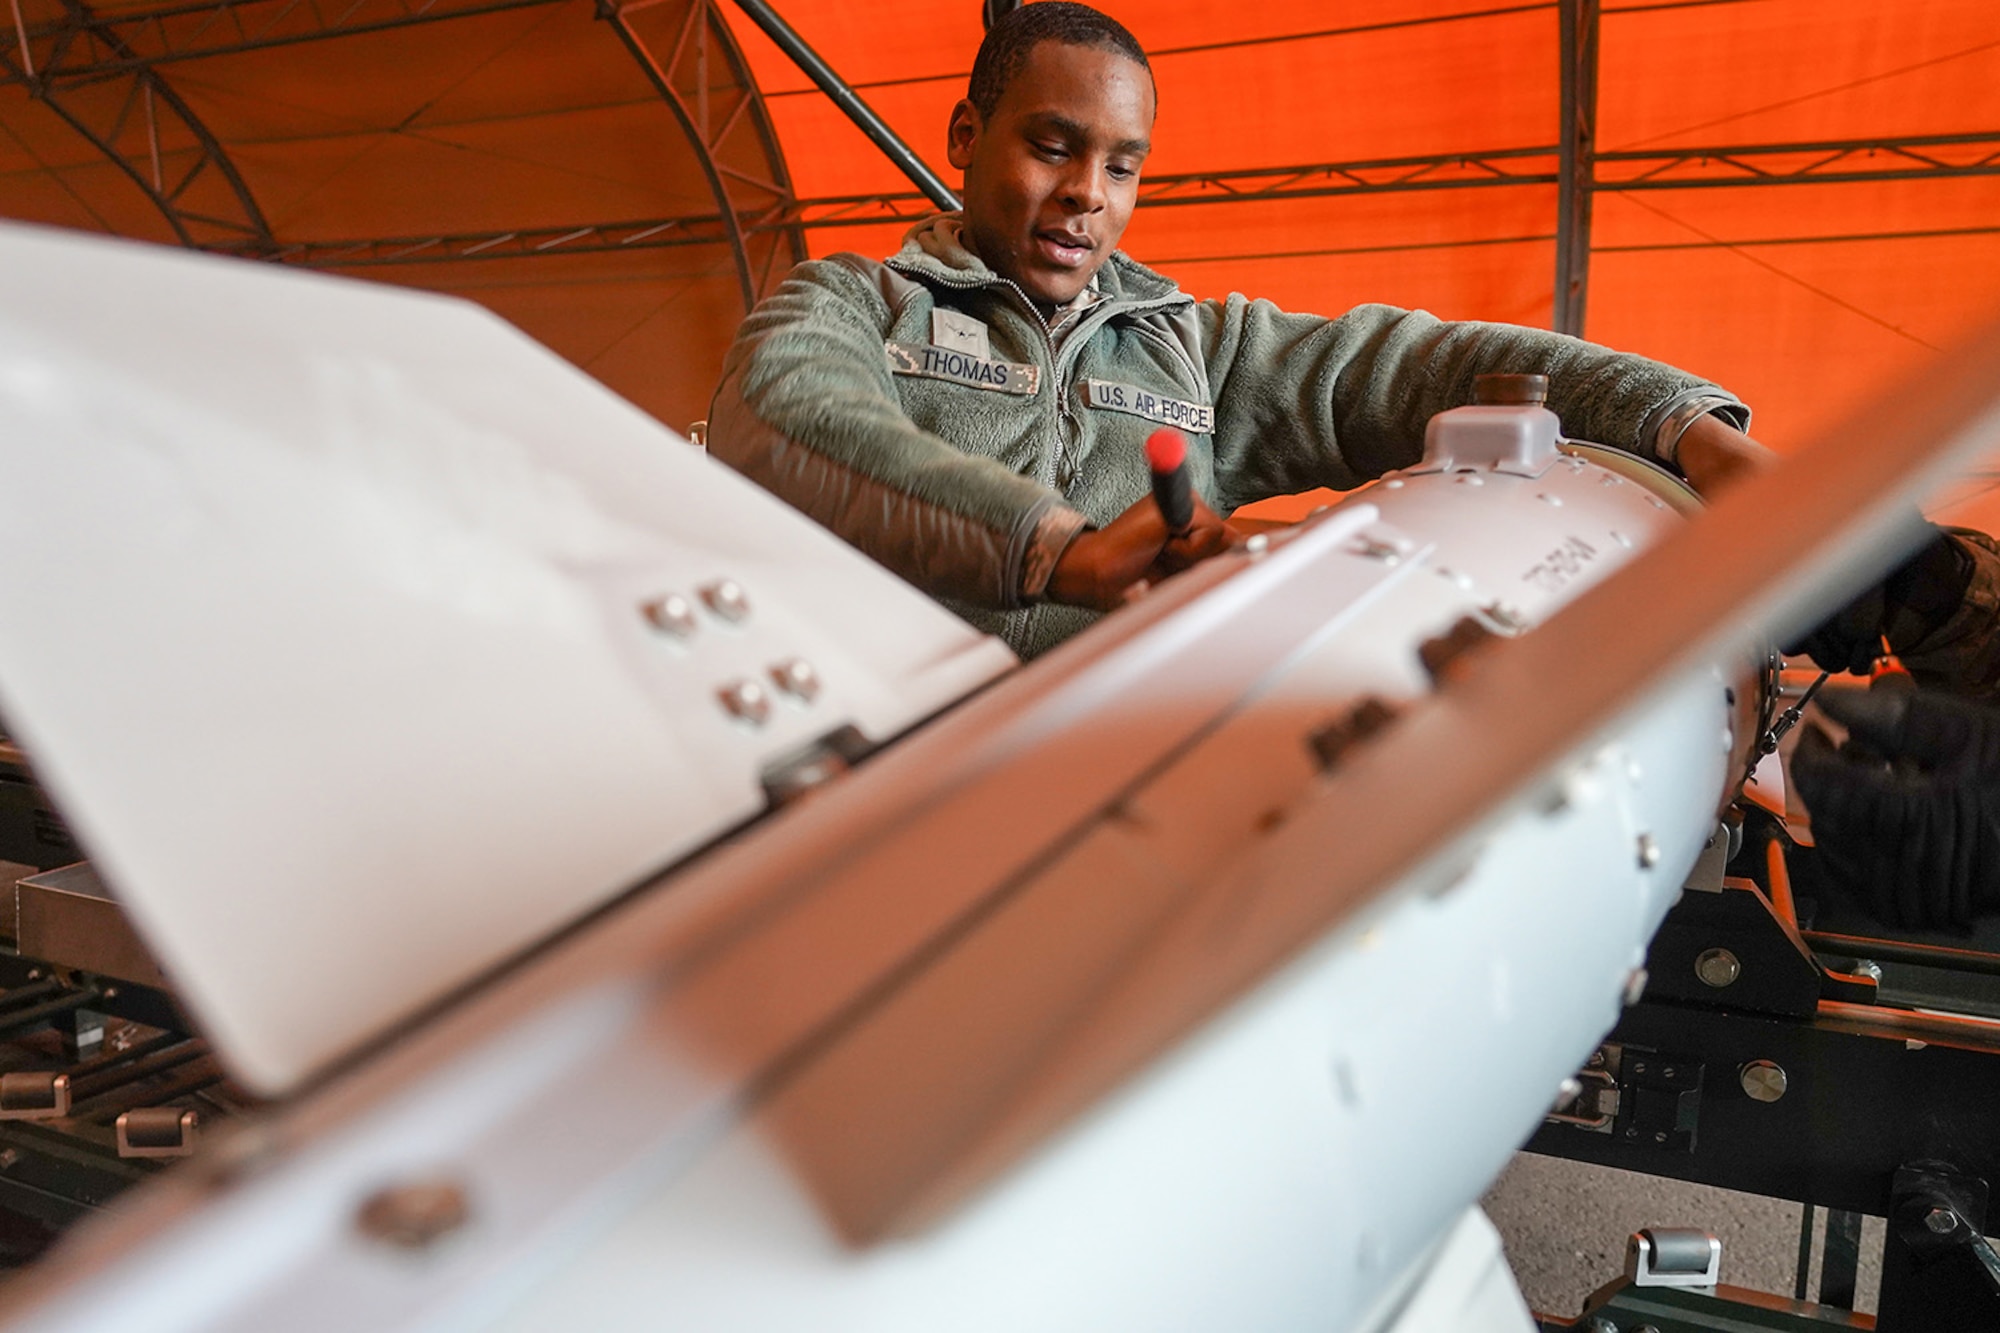 Airman Nathan Thomas, a native of Waco, Texas, assigned to the 3rd Munitions Squadron helps build a GBU-32 (Guided Bomb Unit) on Joint Base Elmendorf-Richardson, Alaska, Oct. 2, 2019, while participating in the Polar Force 20-1 exercise. Polar Force 20-1 is designed to exercise multiple elements of the Agile Combat Employment (ACE) concept of operations, which include generating 5th Generation combat power from austere locations, command and control using non-traditional methods, and rapid airlift capabilities to sustain a forward operating location.  The ACE concept enables 3rd Wing to deliver lethal Airpower for America, even in a contested environment.